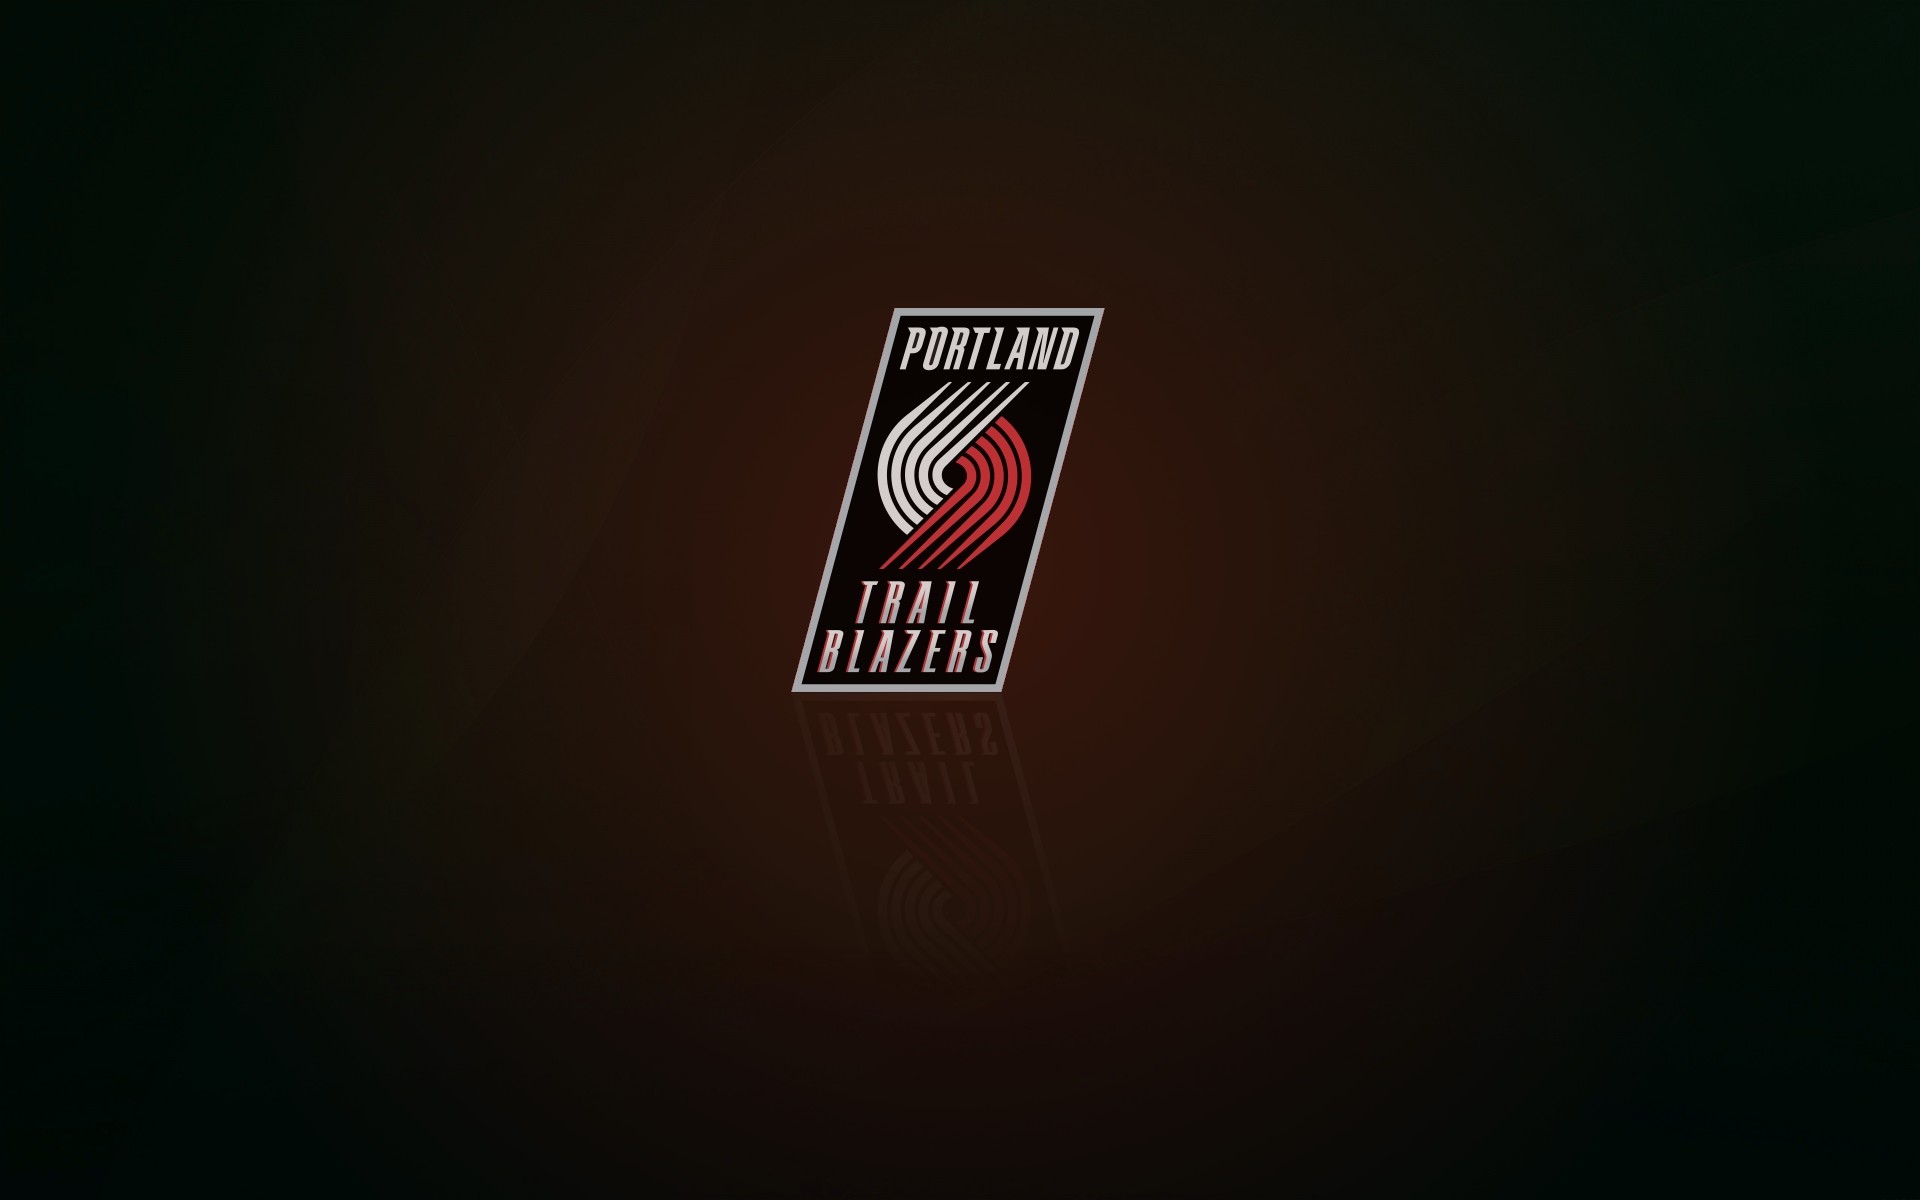 Portland Trail Blazers Wallpapers (68+ pictures)1920 x 1200